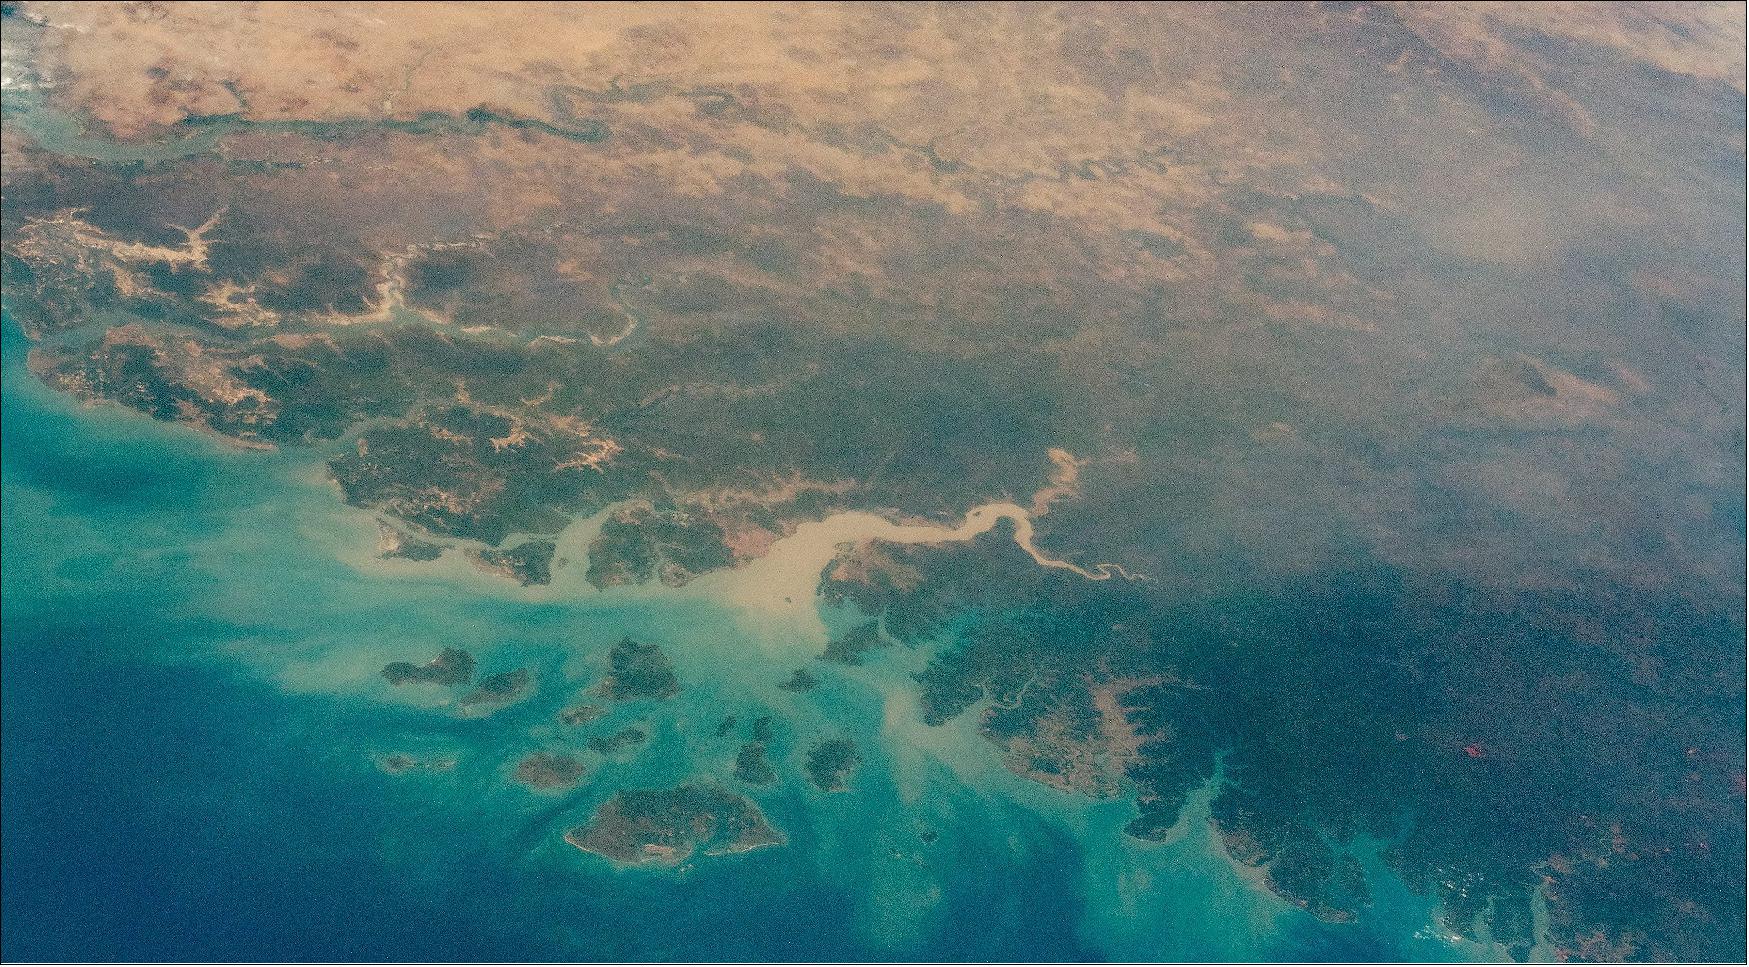 Figure 63: An astronaut aboard the International Space Station (ISS) took this oblique photograph that shows most of the West African country of Guinea-Bissau, along with neighboring Guinea, The Gambia and Senegal, and the southern part of Mauritania. This scene stretches from the green forest vegetation and wet climates of the Atlantic coast to the almost vegetation-less landscapes of the Sahara Desert (image credit: NASA)